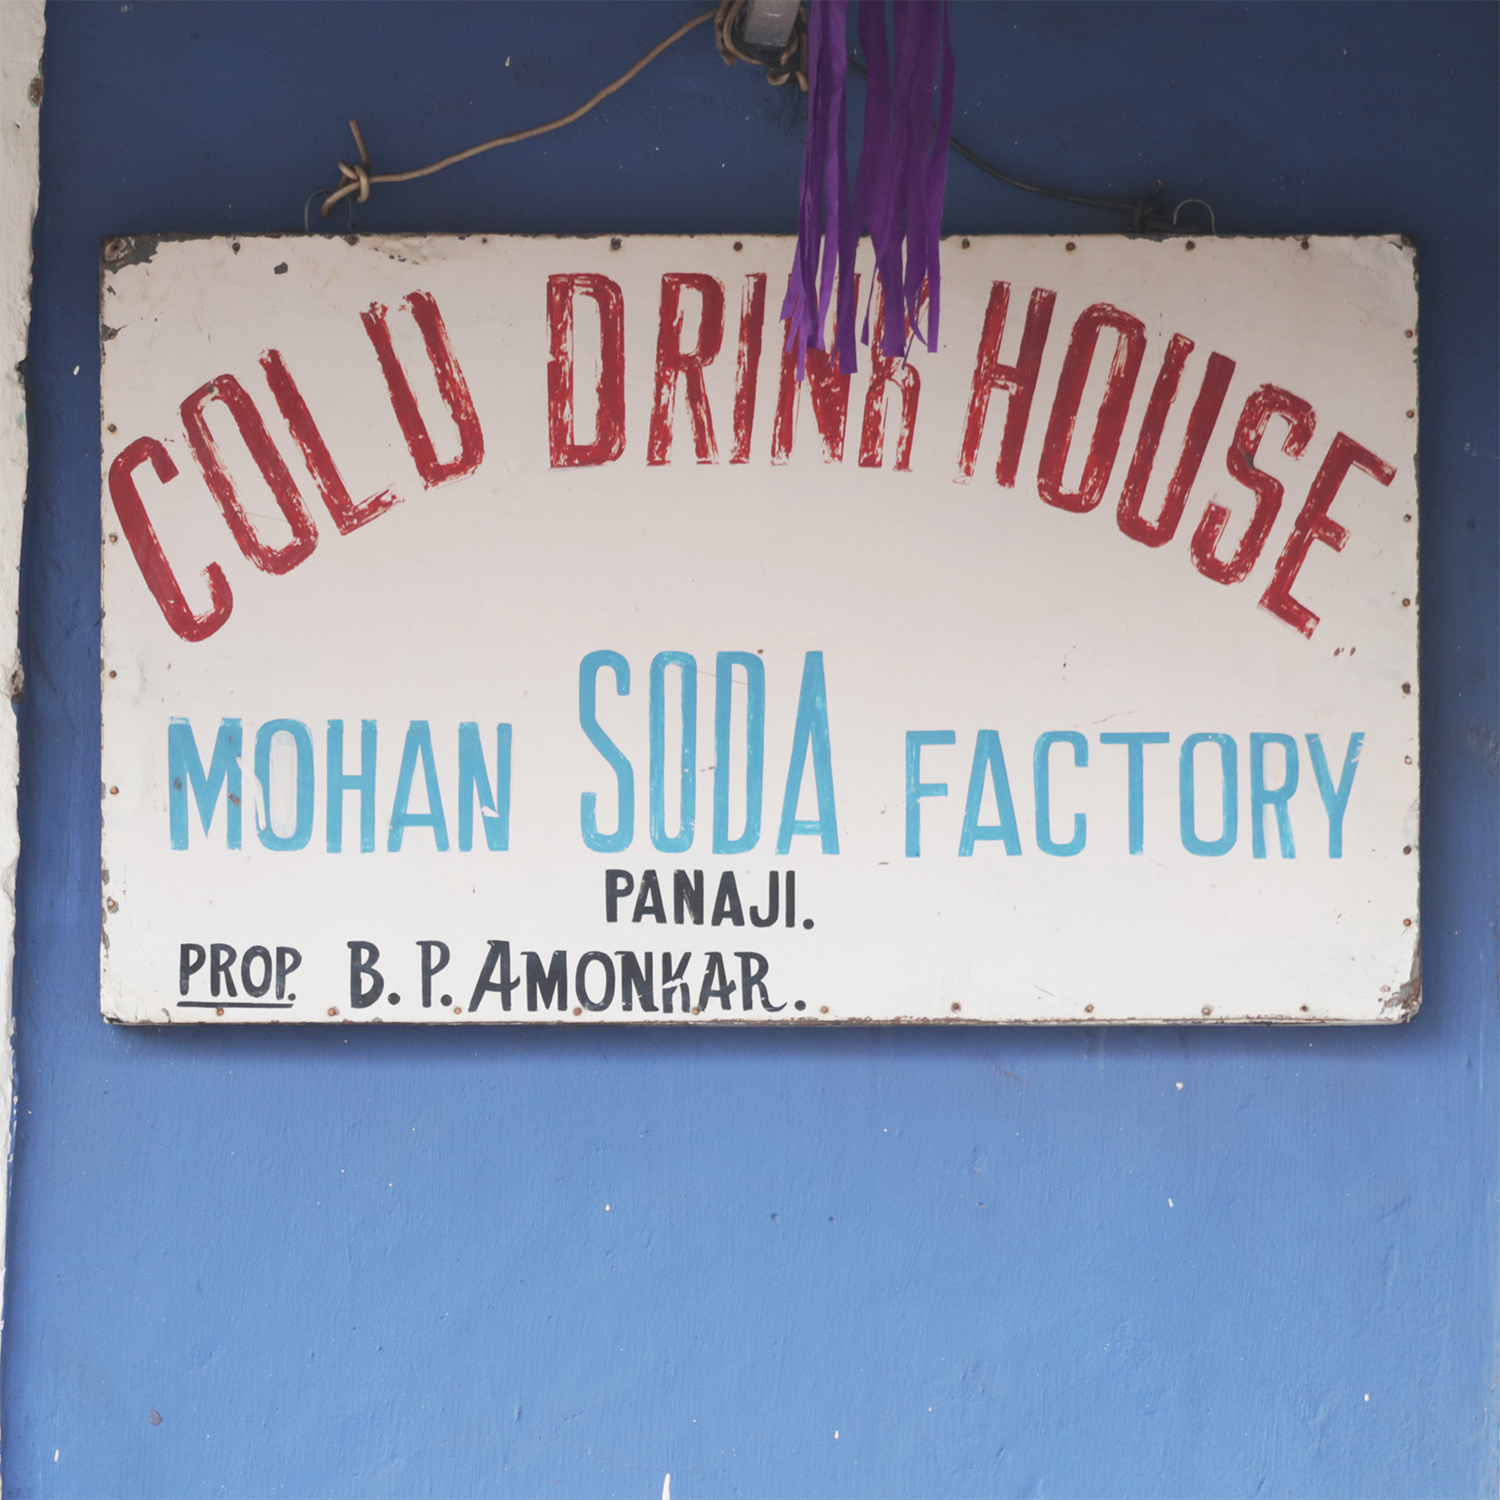 Cold Drink House